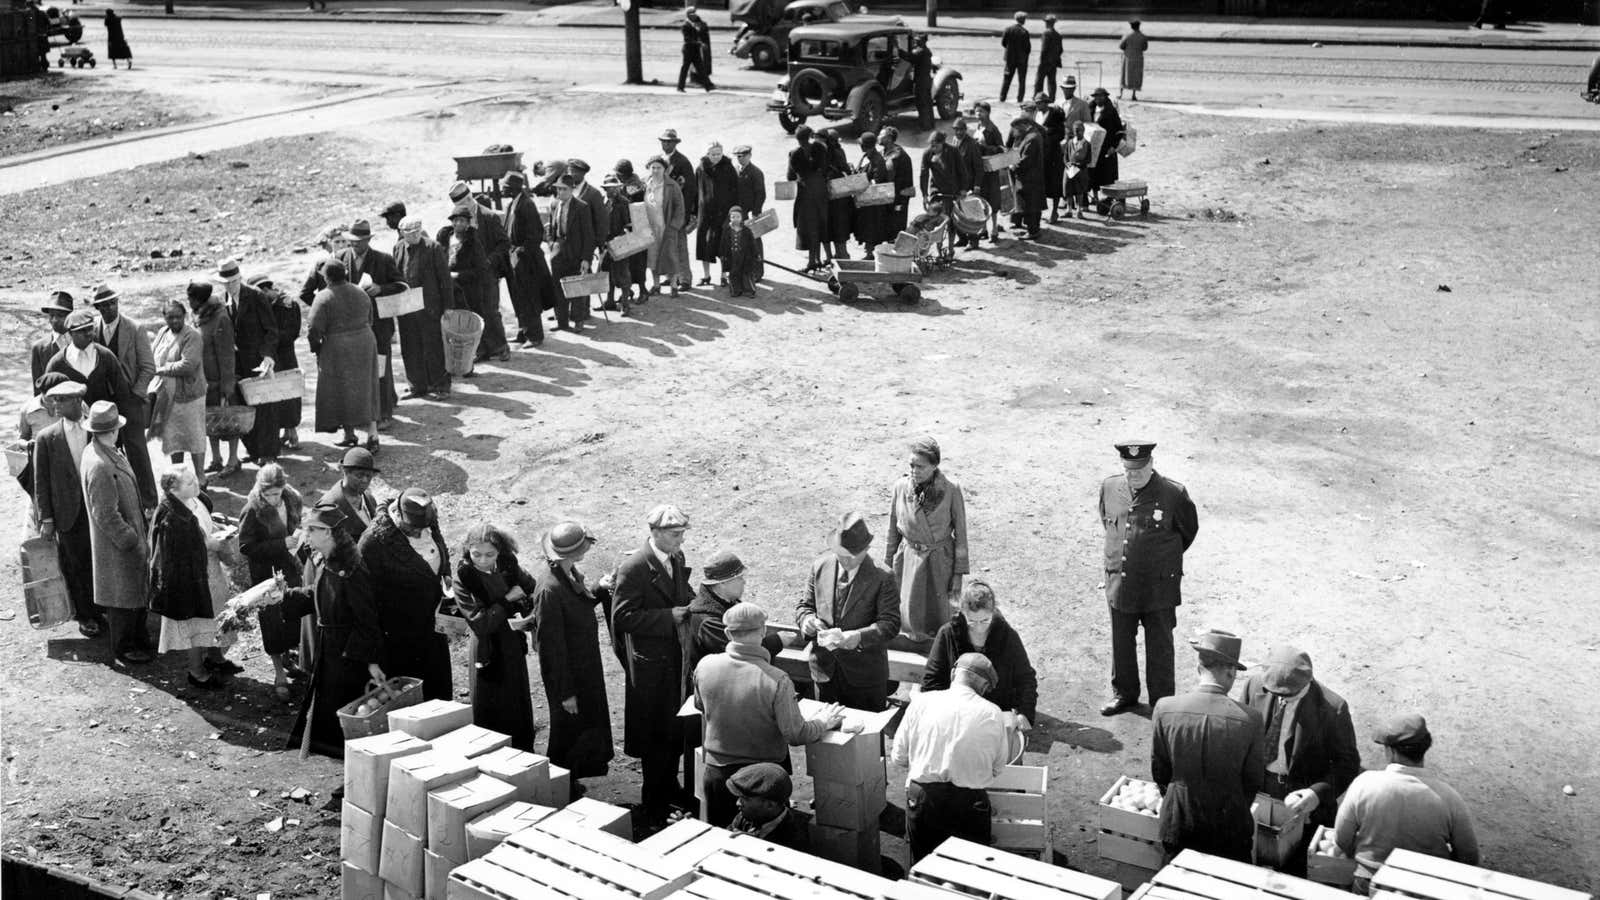 How money games got rid of food lines in the Great Depression.